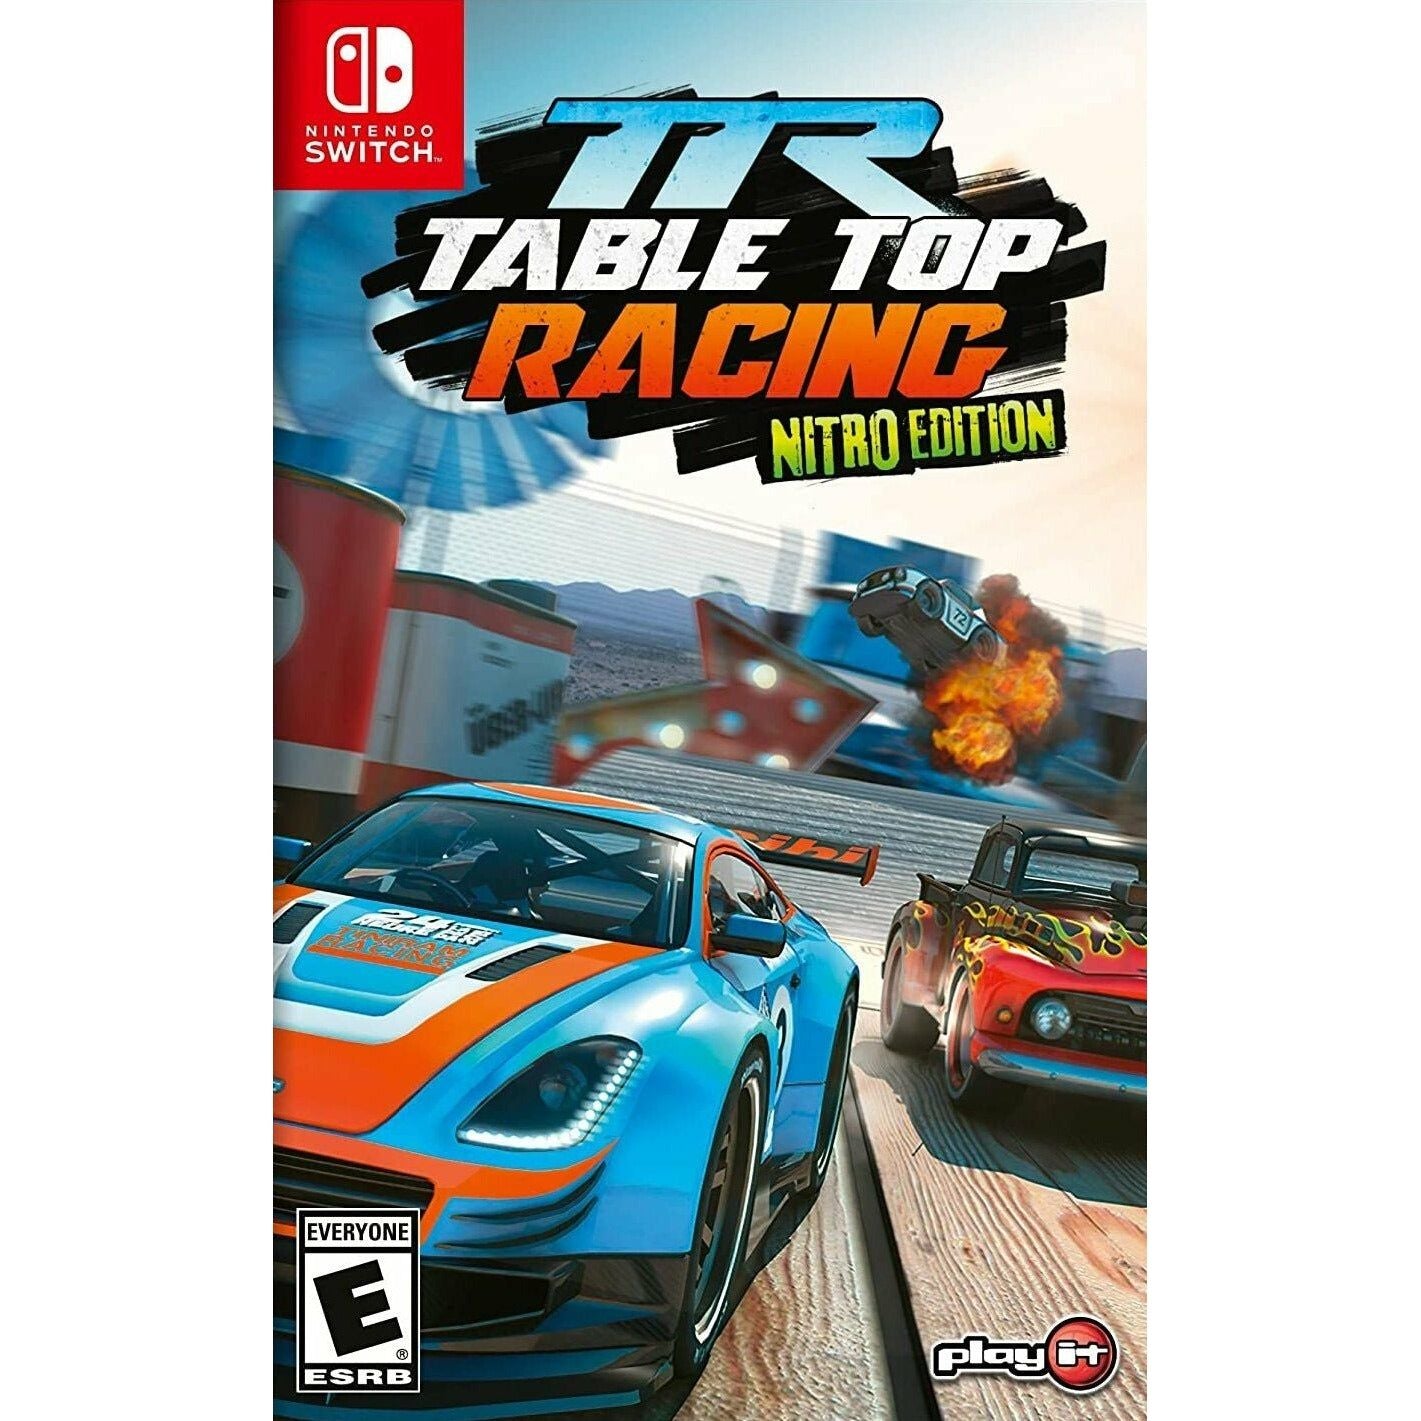 Switch - Table Top Racing Nitro Edition (In Case)